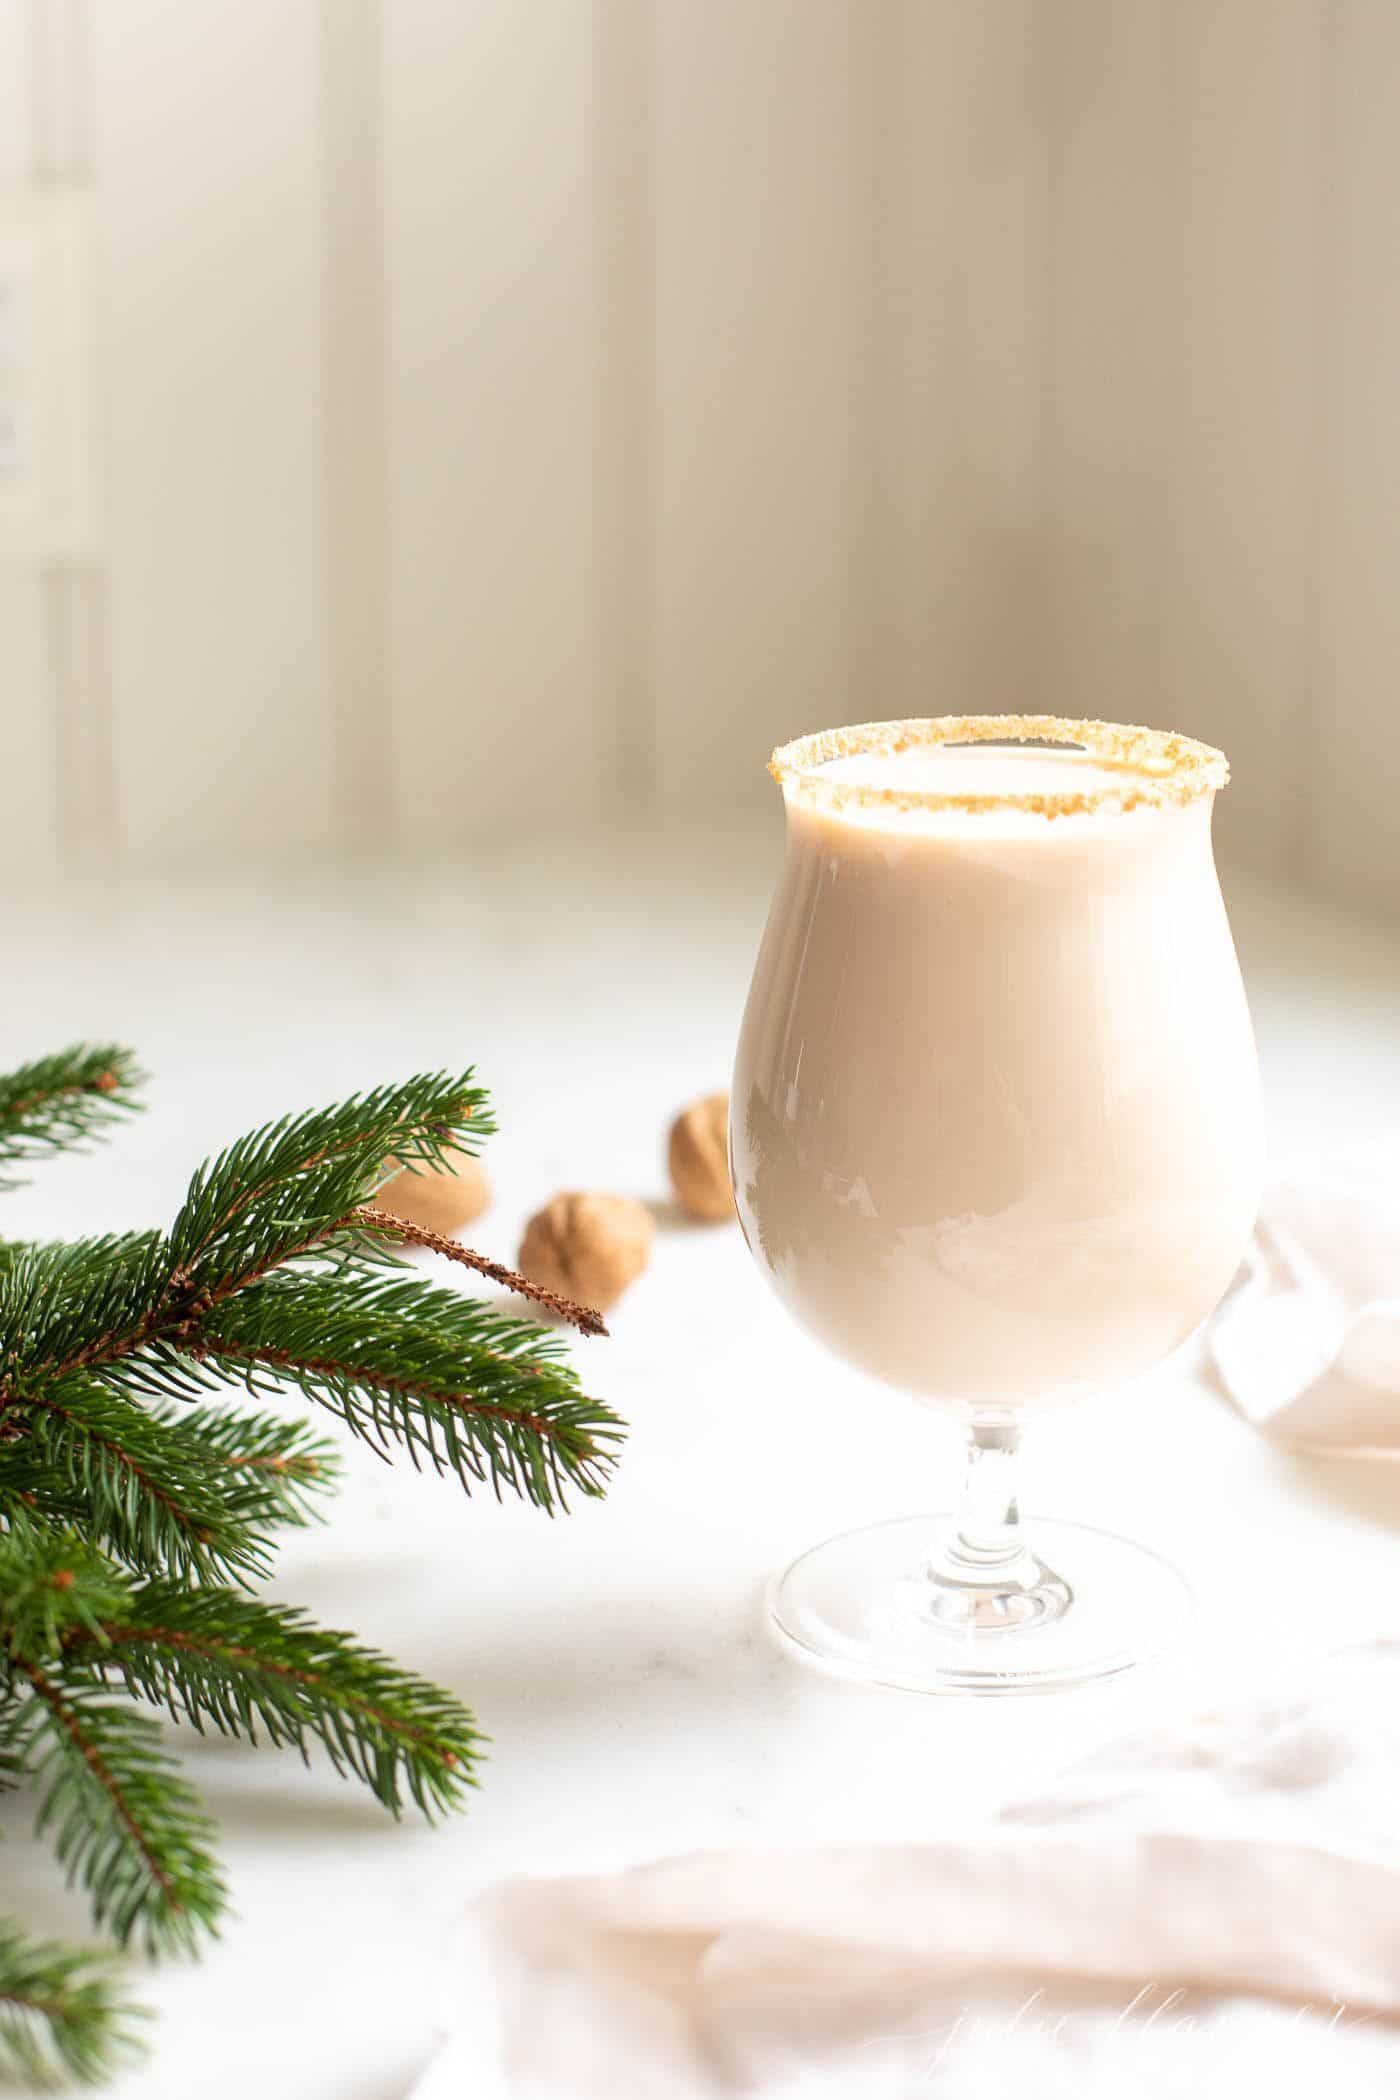 A clear glass filled with an oatmeal cookie Christmas cocktail, greenery and hazelnuts in the background.